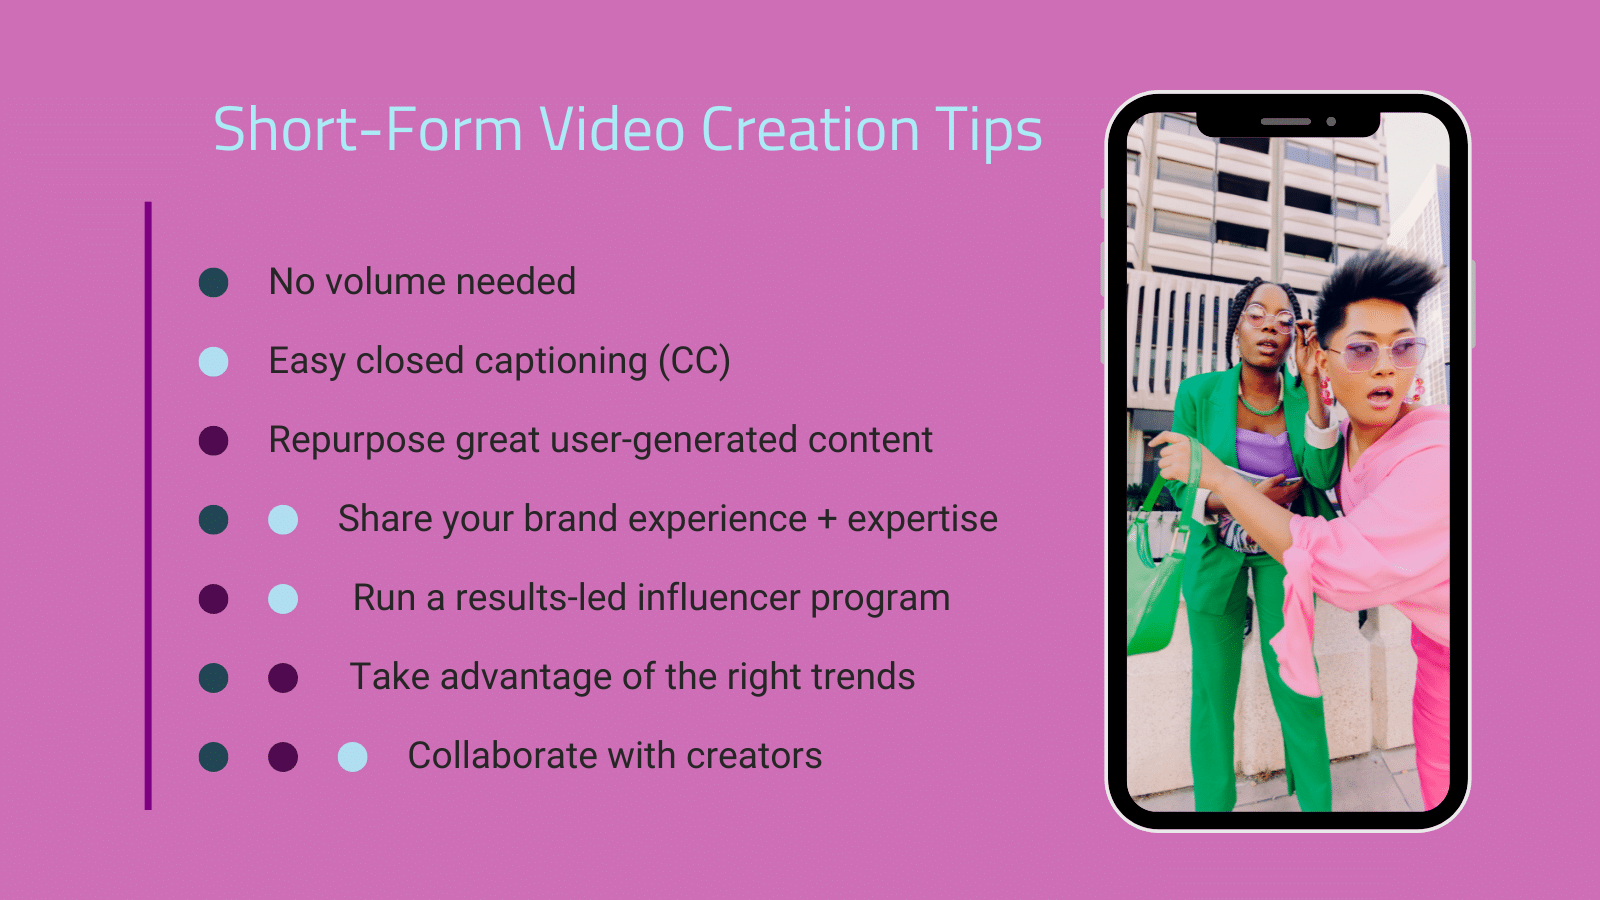 Short-Form Video Creation Tips:
No volume needed
Easy closed captioning (CC)
Repurpose user-generated content
Share your brand experience + expertise
Run a results-led influencer program
Take advantage of the right trends
Collaborate with creators